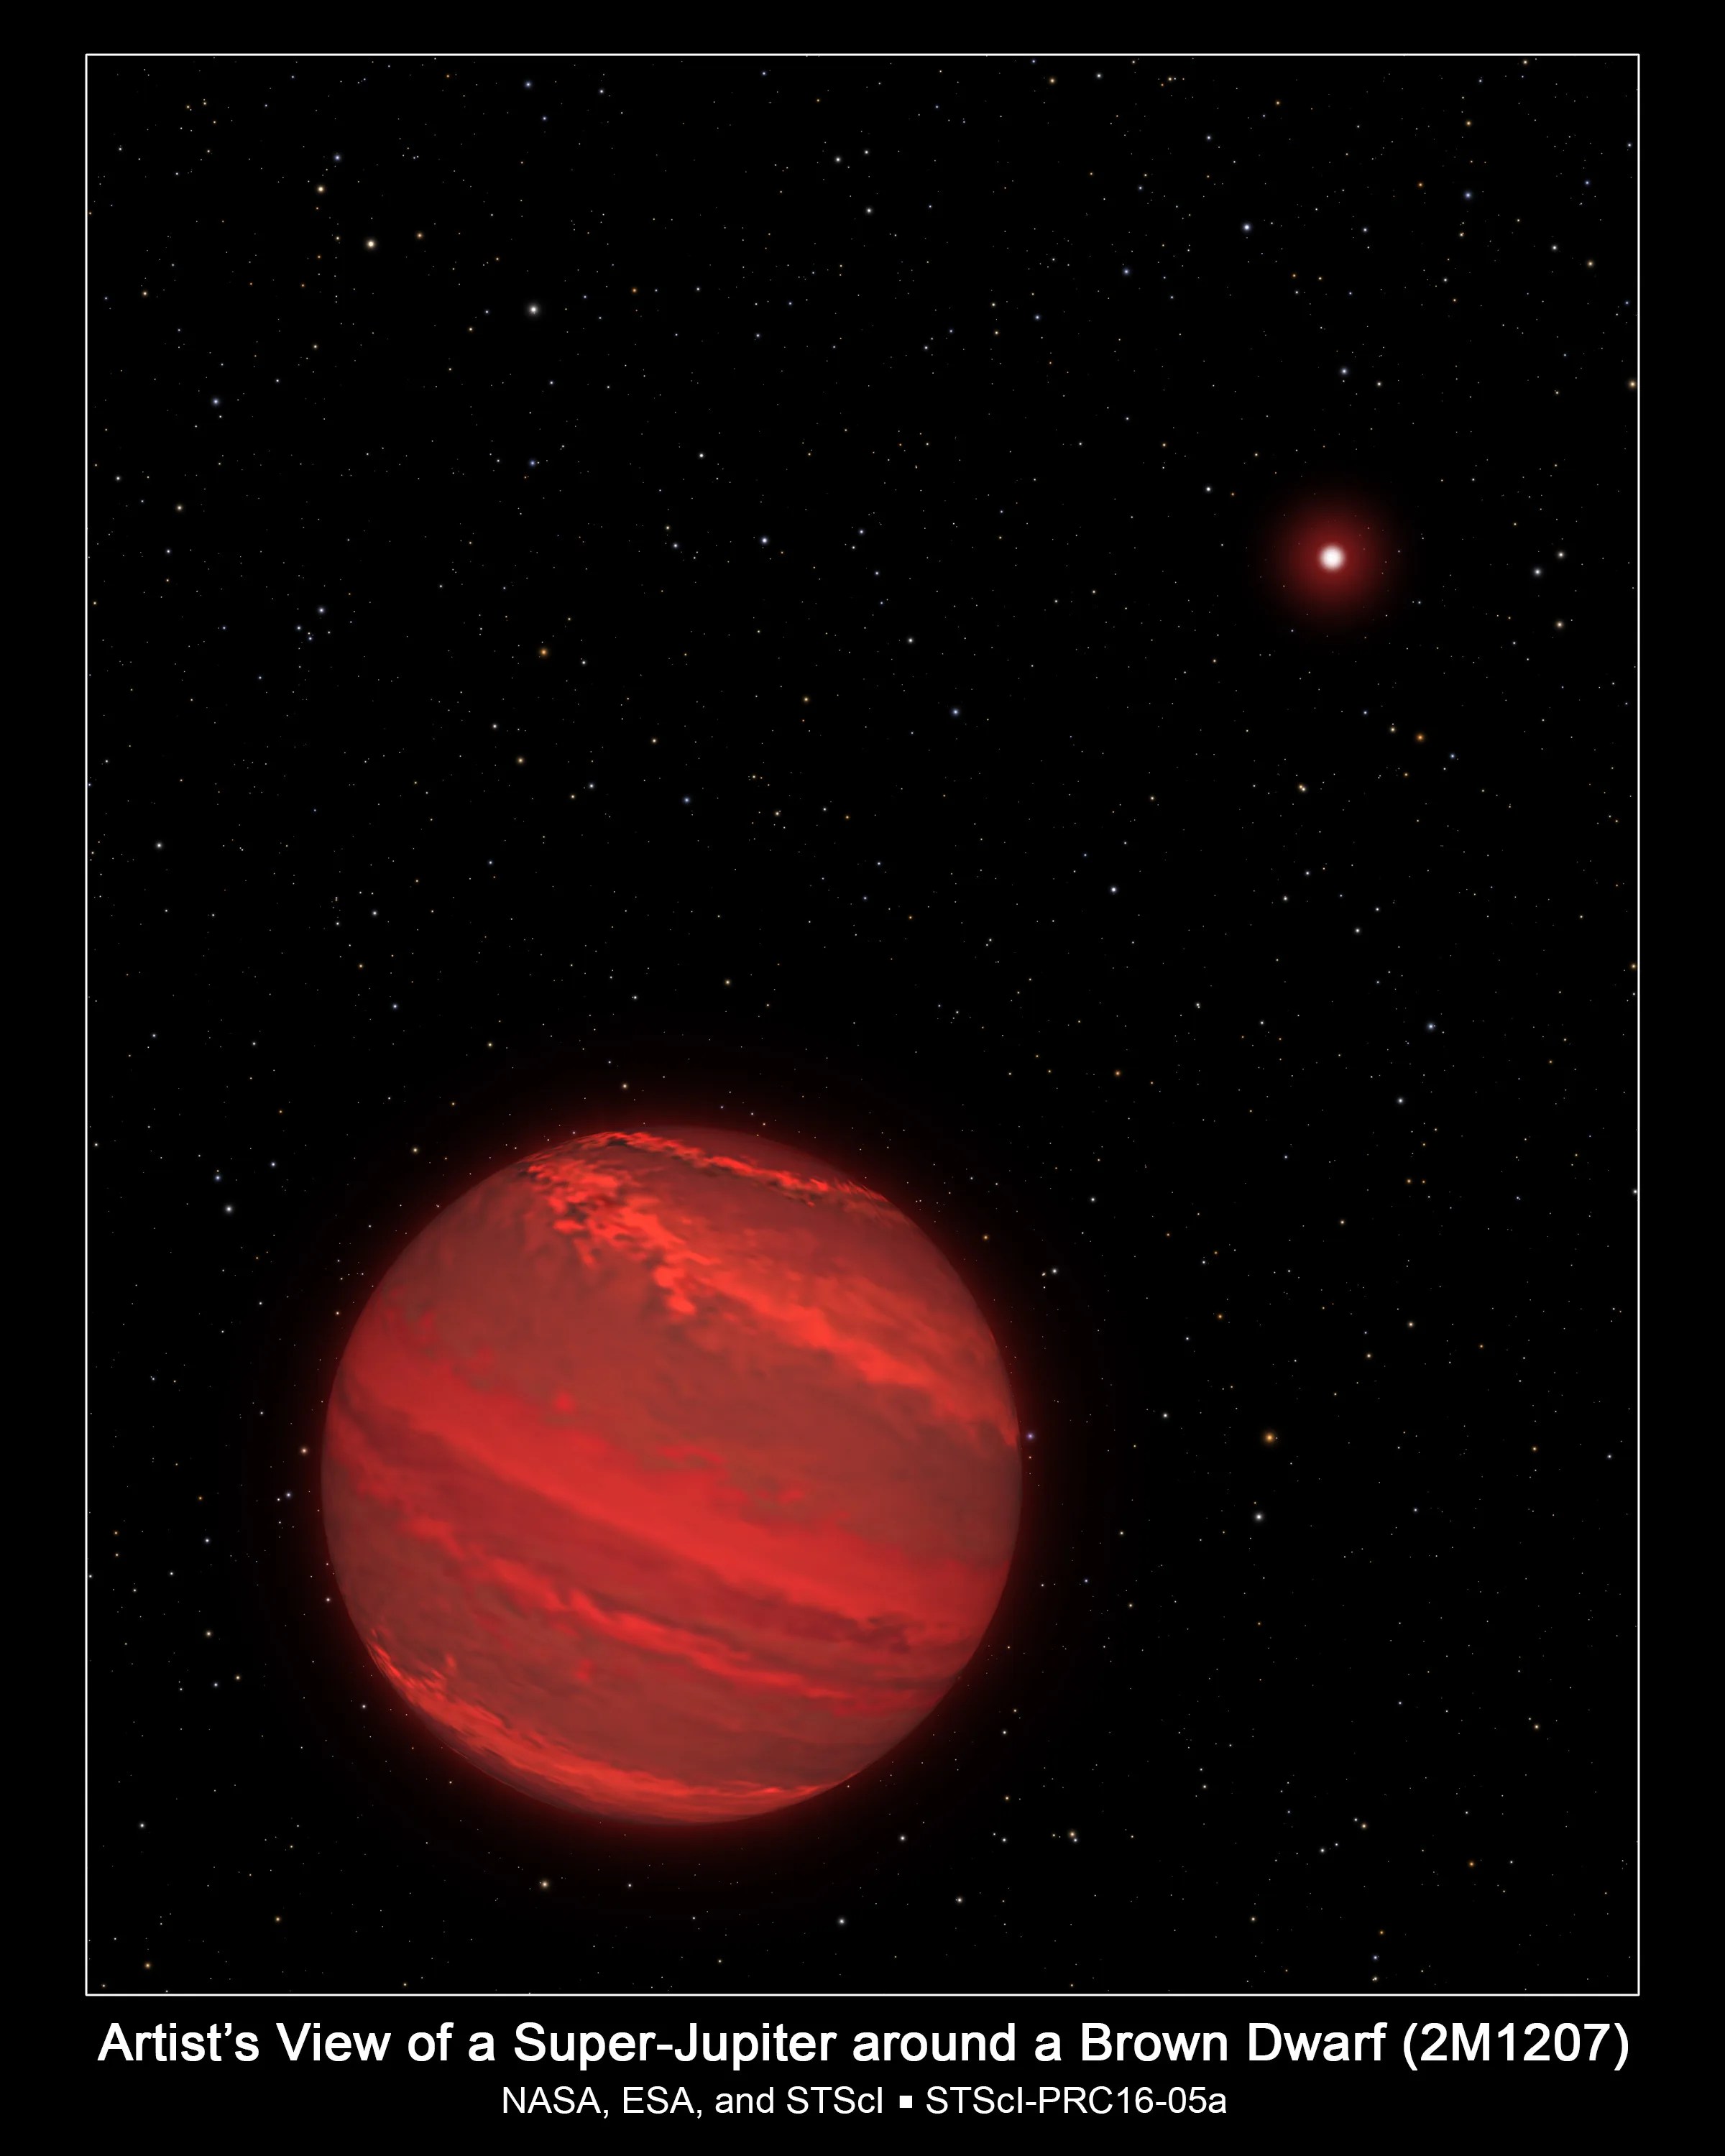 Illustration of a planet that is four times the mass of Jupiter and orbits 5 billion miles from a brown dwarf companion object